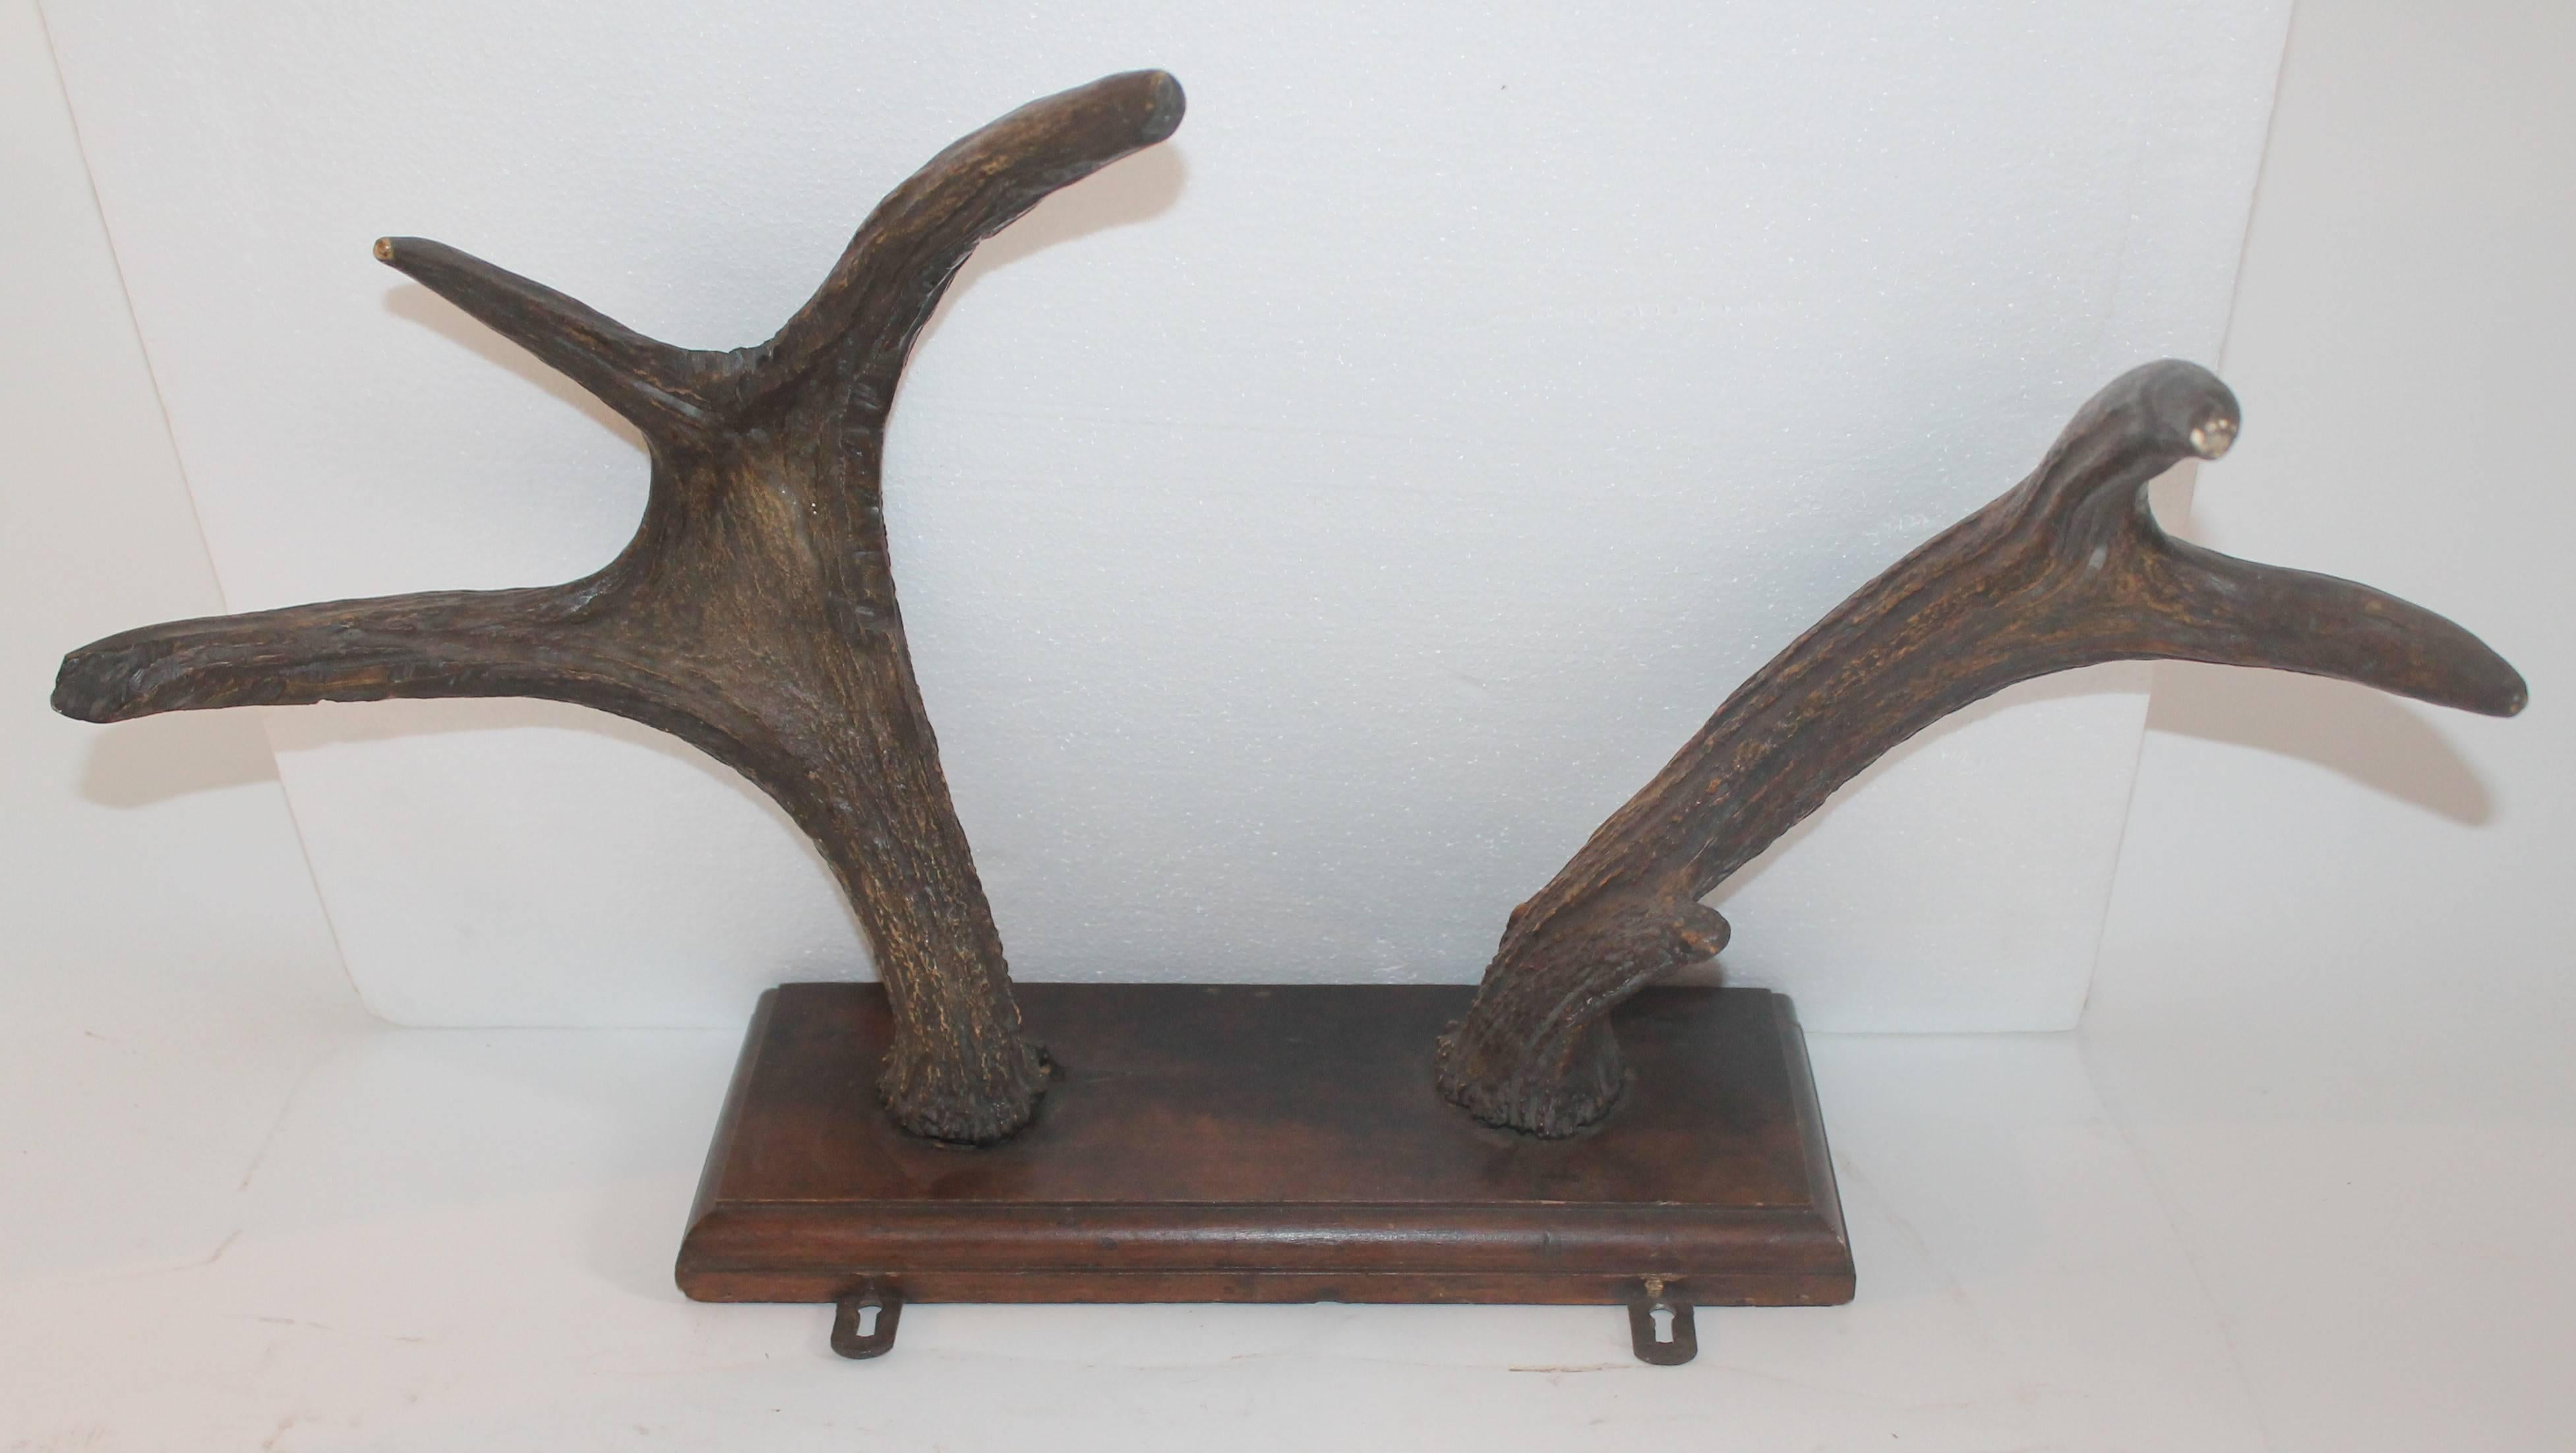 These deer antlers are from the 19th century and are mounted on walnut plank of wood. The hangers are on the reverse of the rack. Condition is very good.